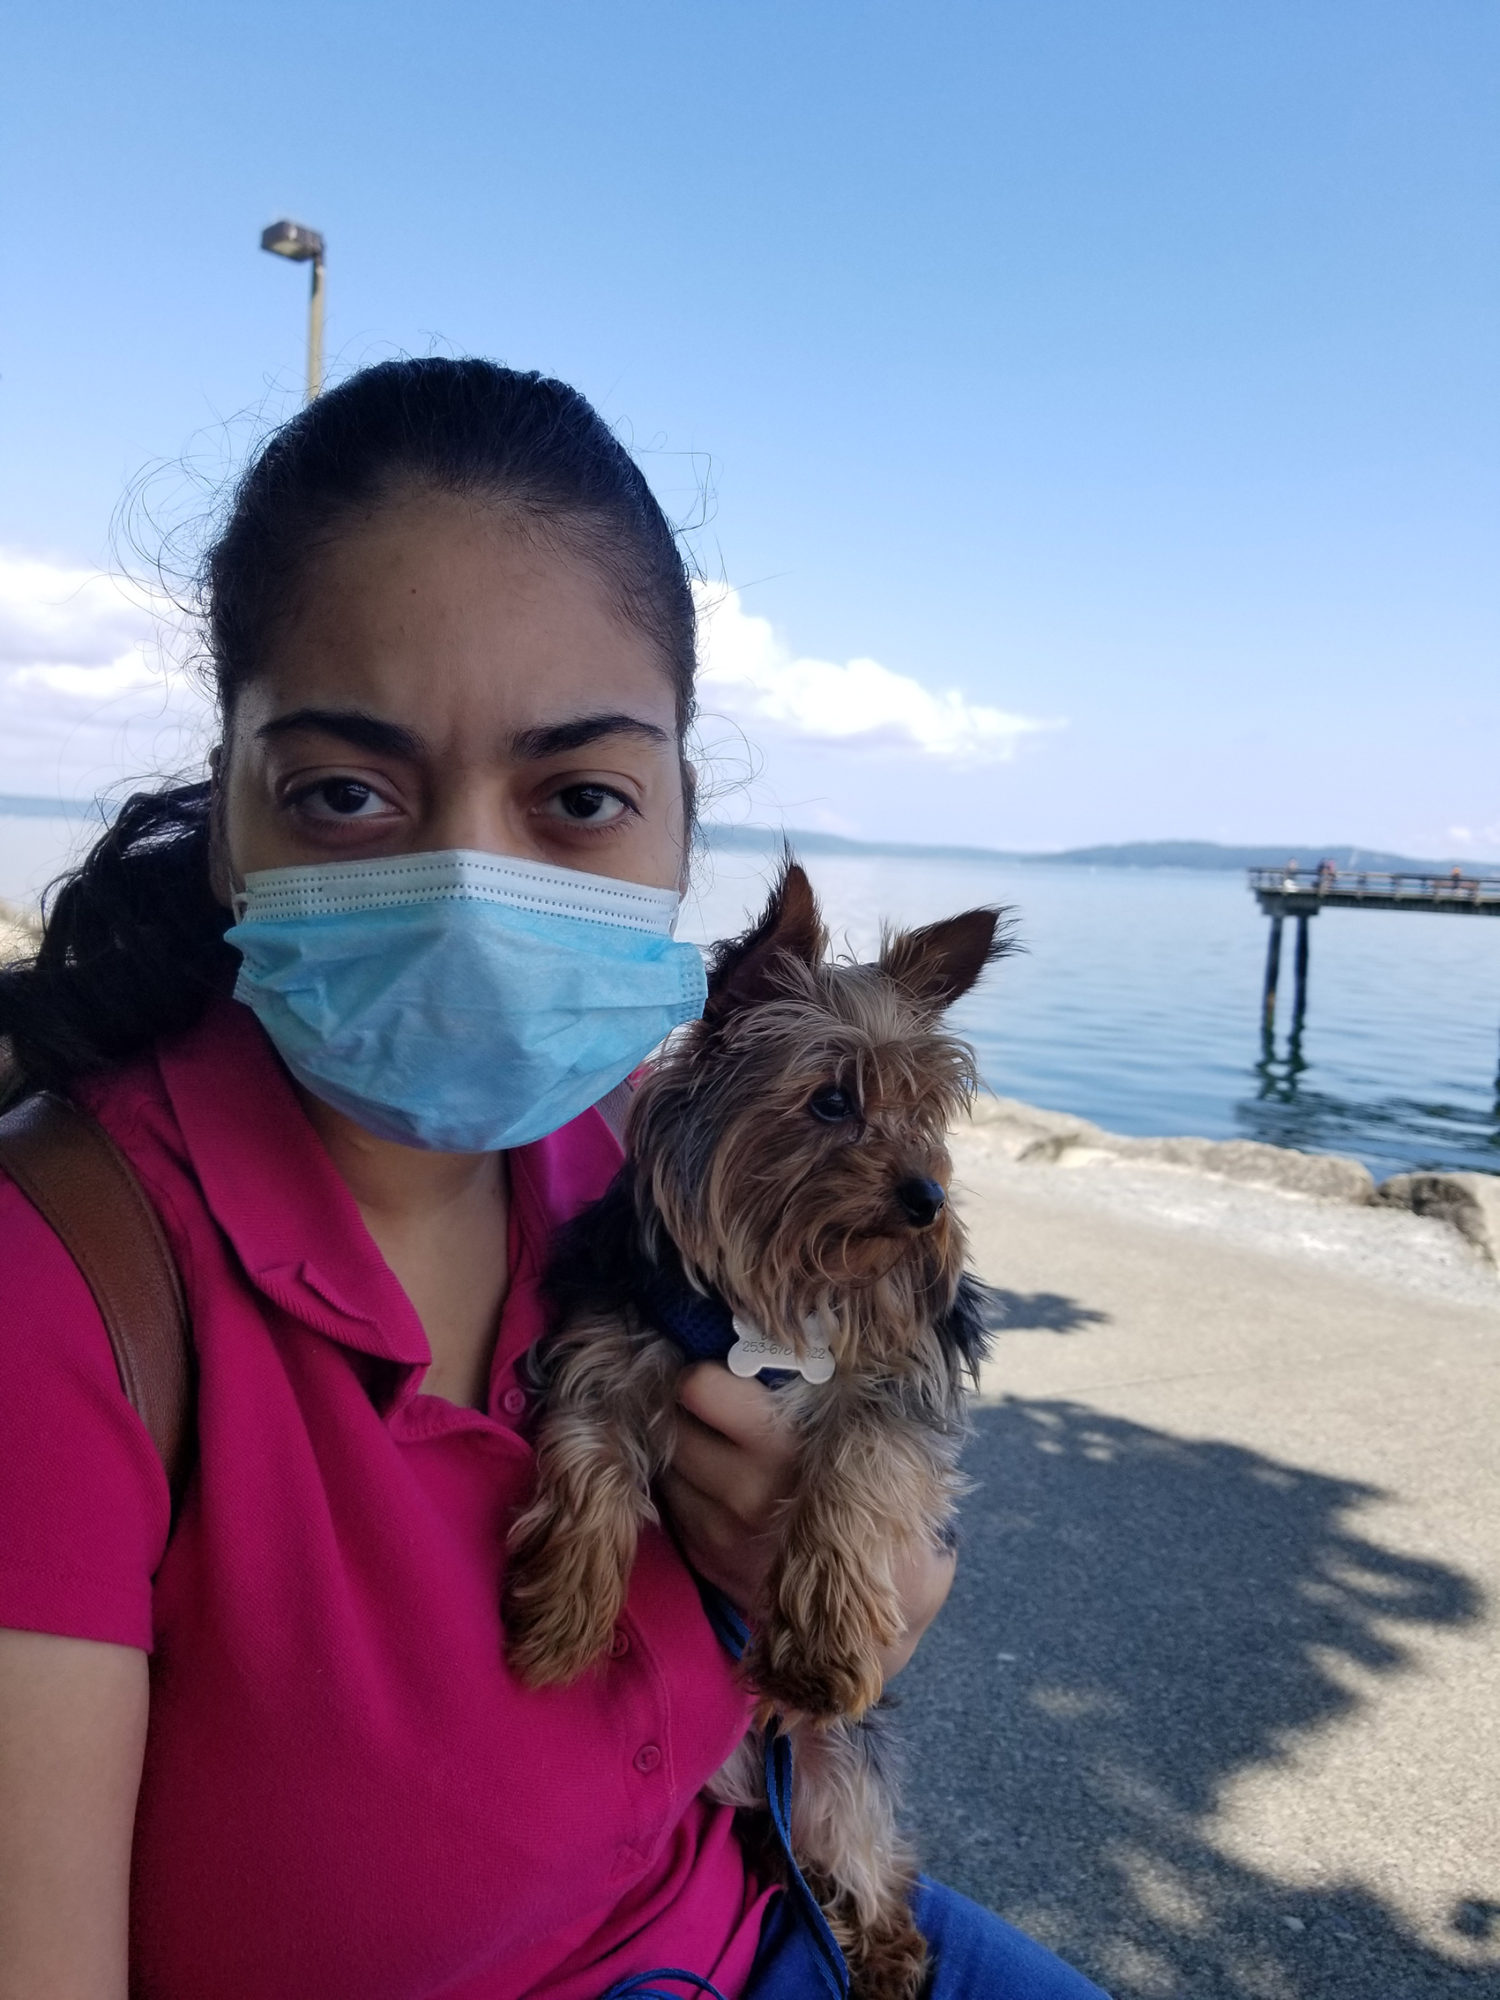 Haisell and her dog on the waterfront.